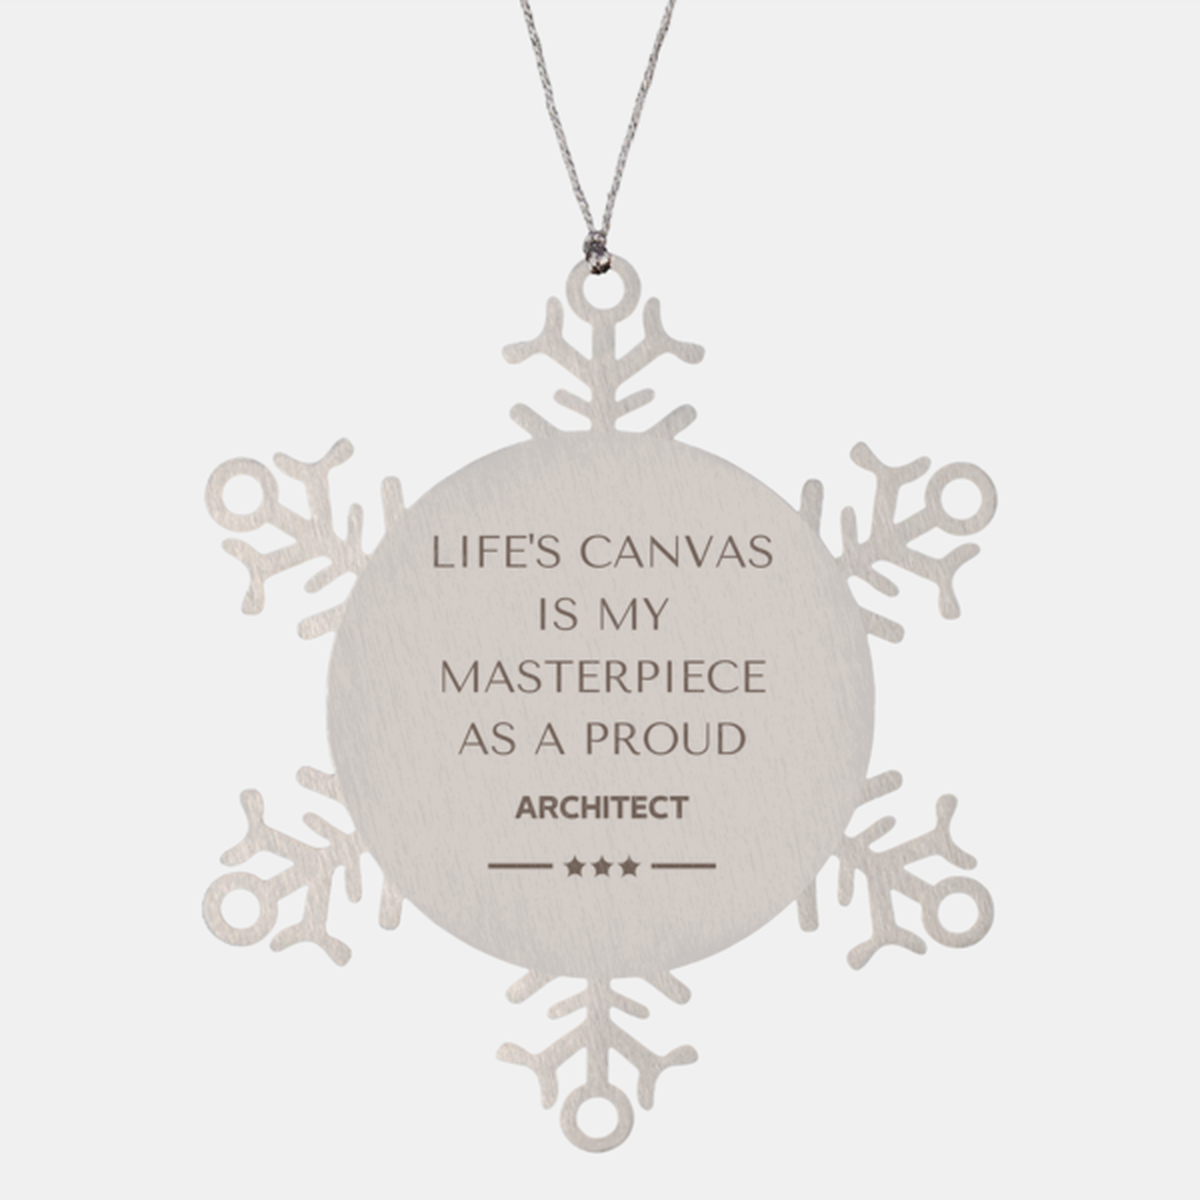 Proud Architect Gifts, Life's canvas is my masterpiece, Epic Birthday Christmas Unique Snowflake Ornament For Architect, Coworkers, Men, Women, Friends